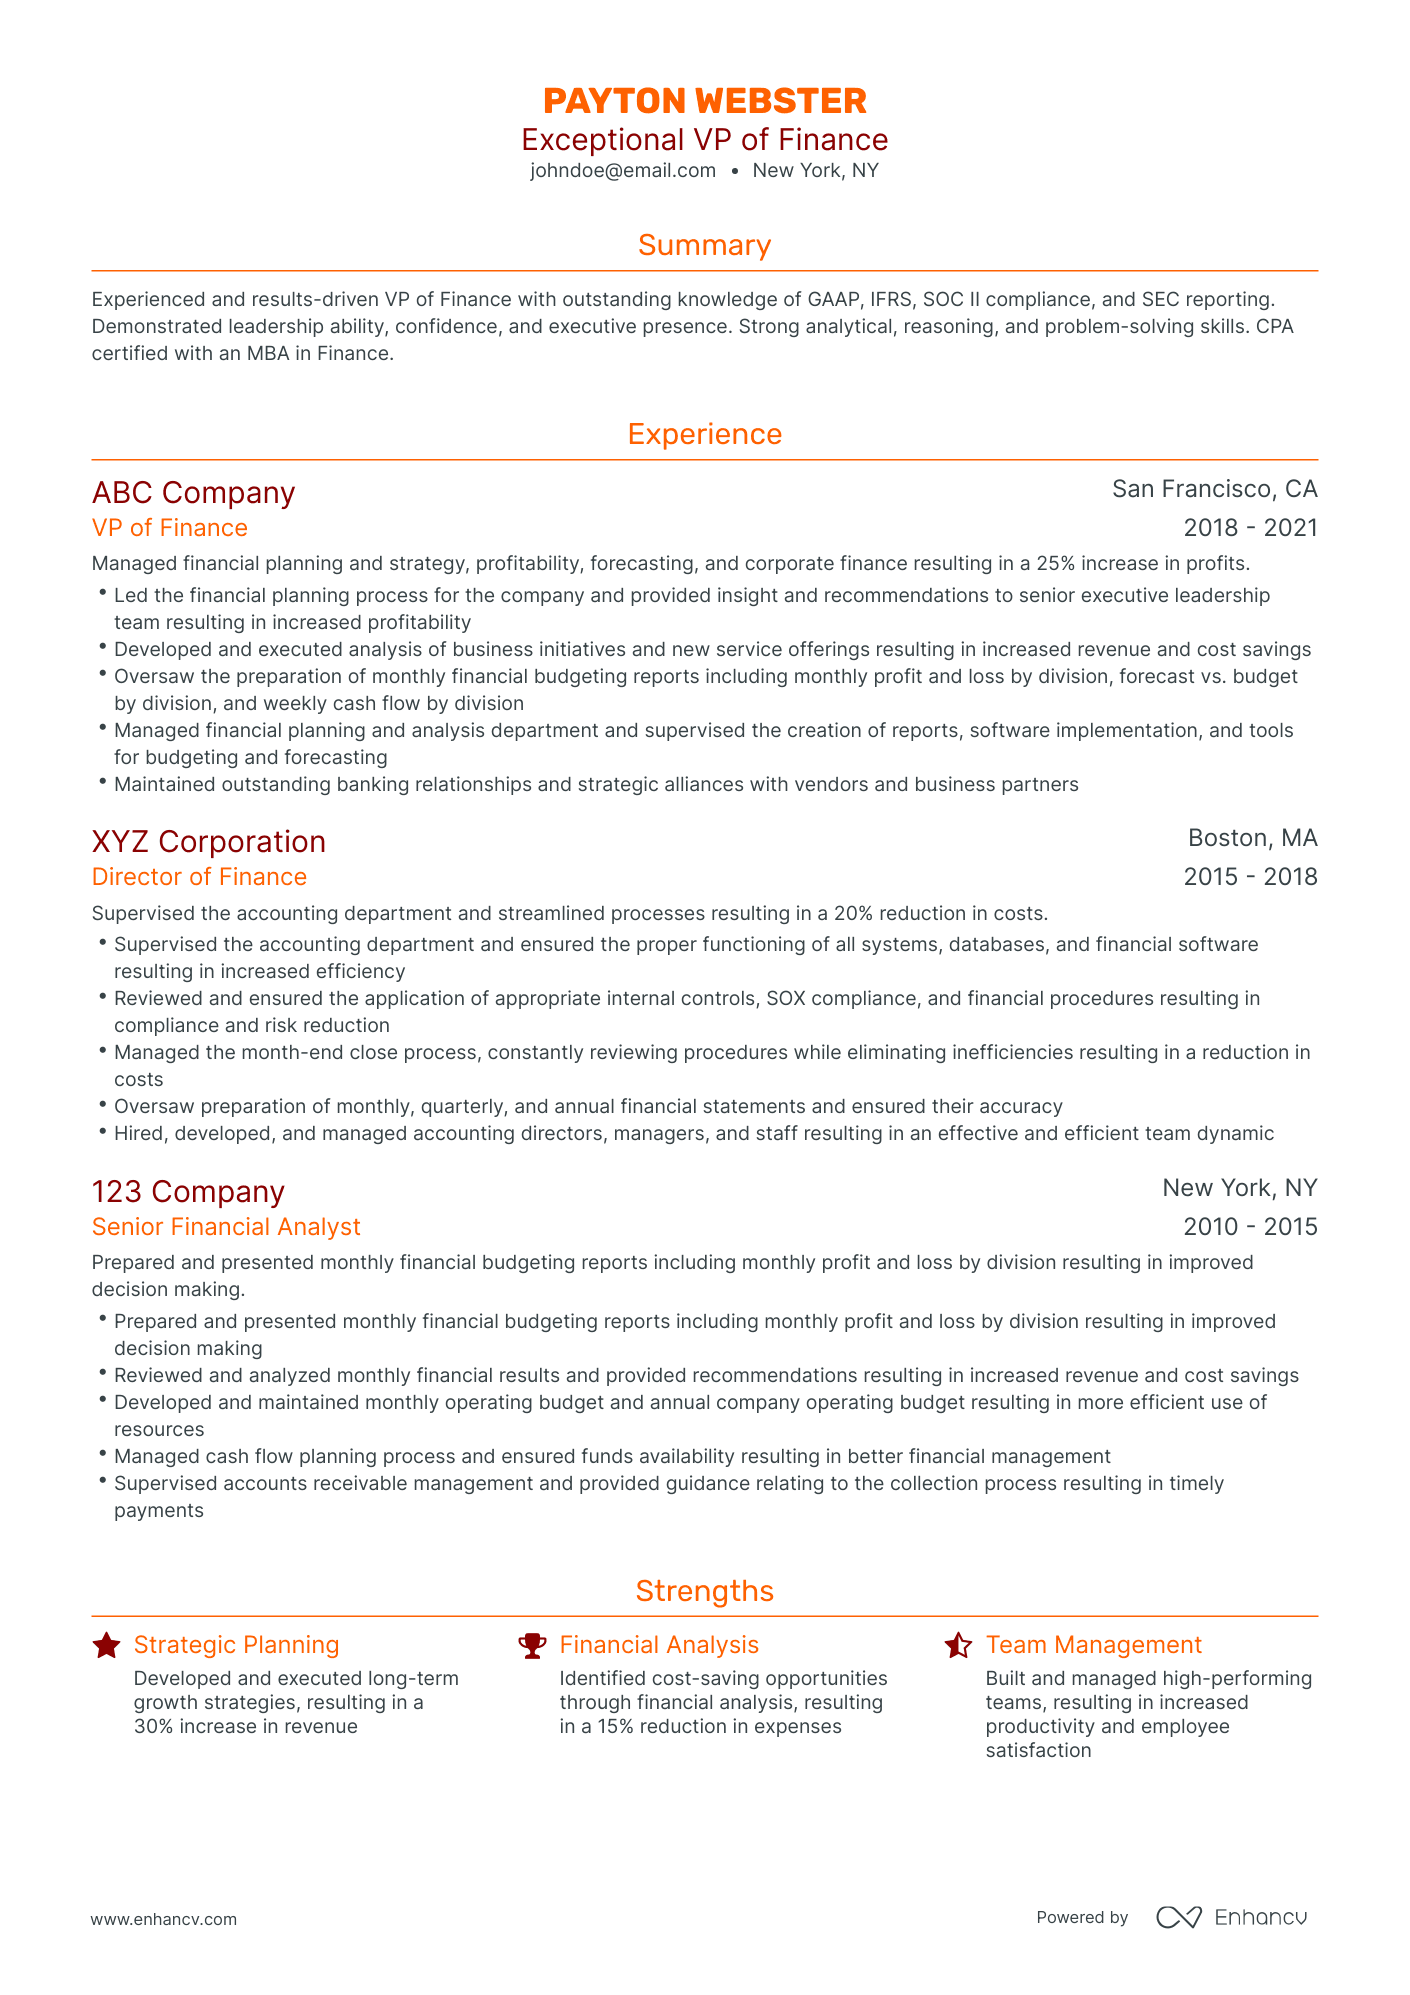 Traditional VP of Finance Resume Template